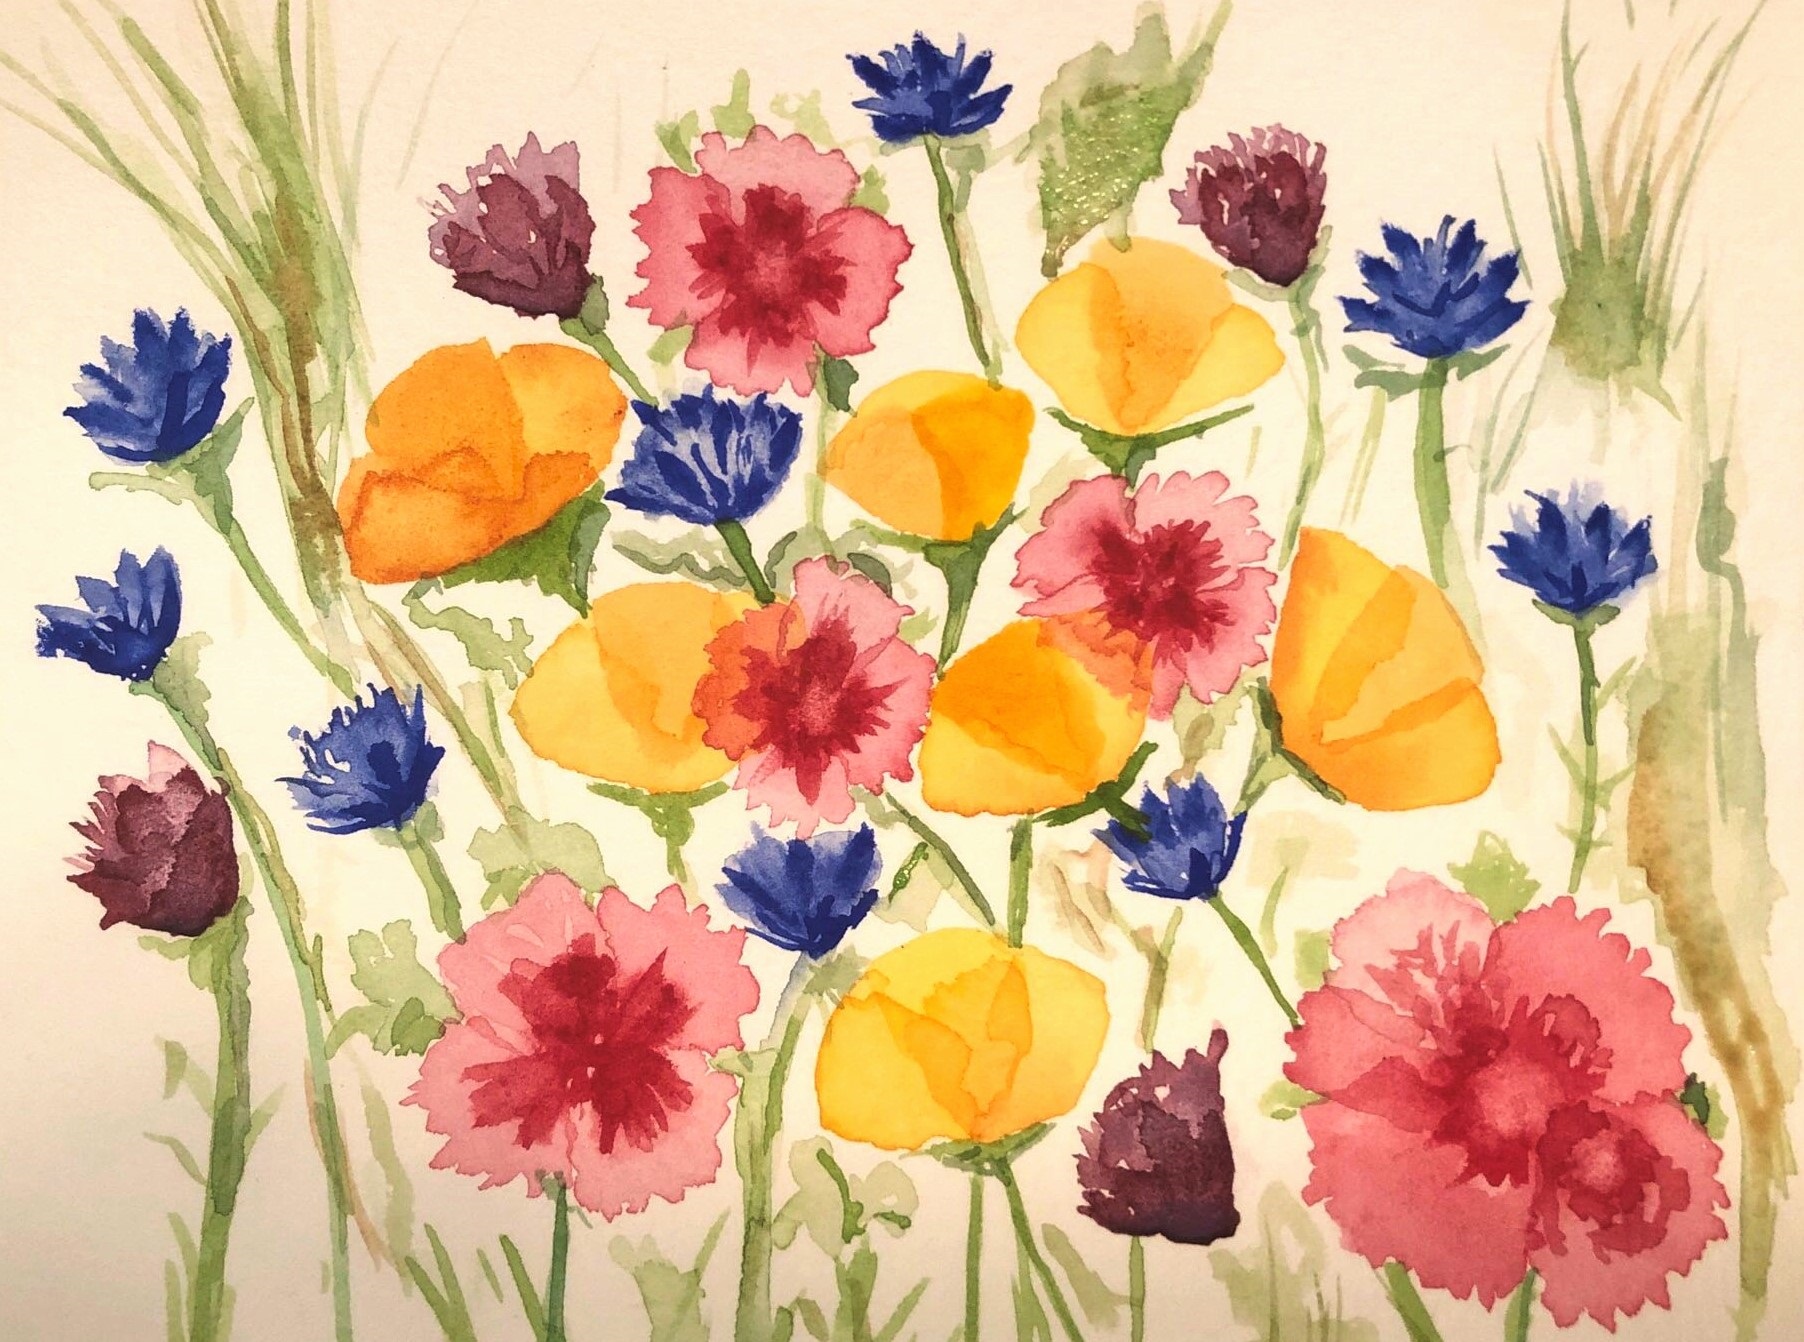 Jennifer Neptune's painting of pink, yellow, purple, orange, and blue flowers with green stems against a natural color background. 